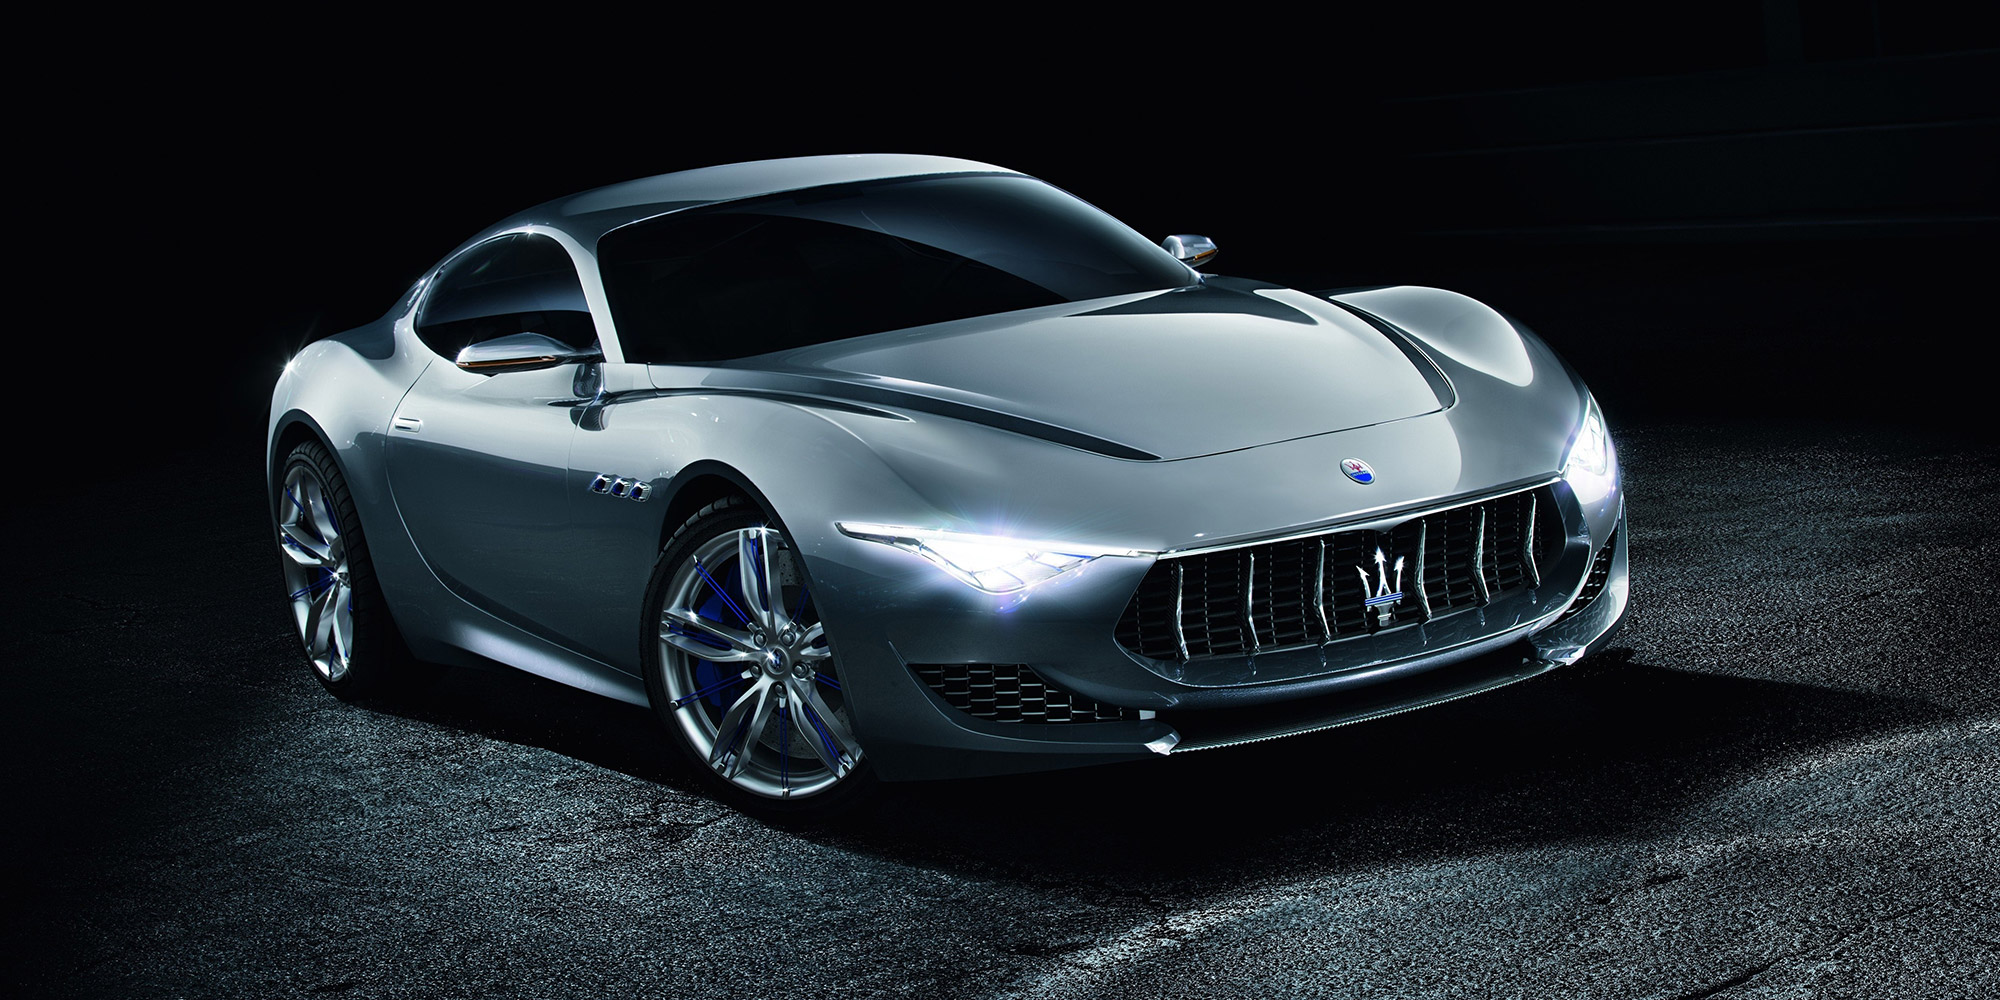 An electric Maserati Alfieri is promised by 2020